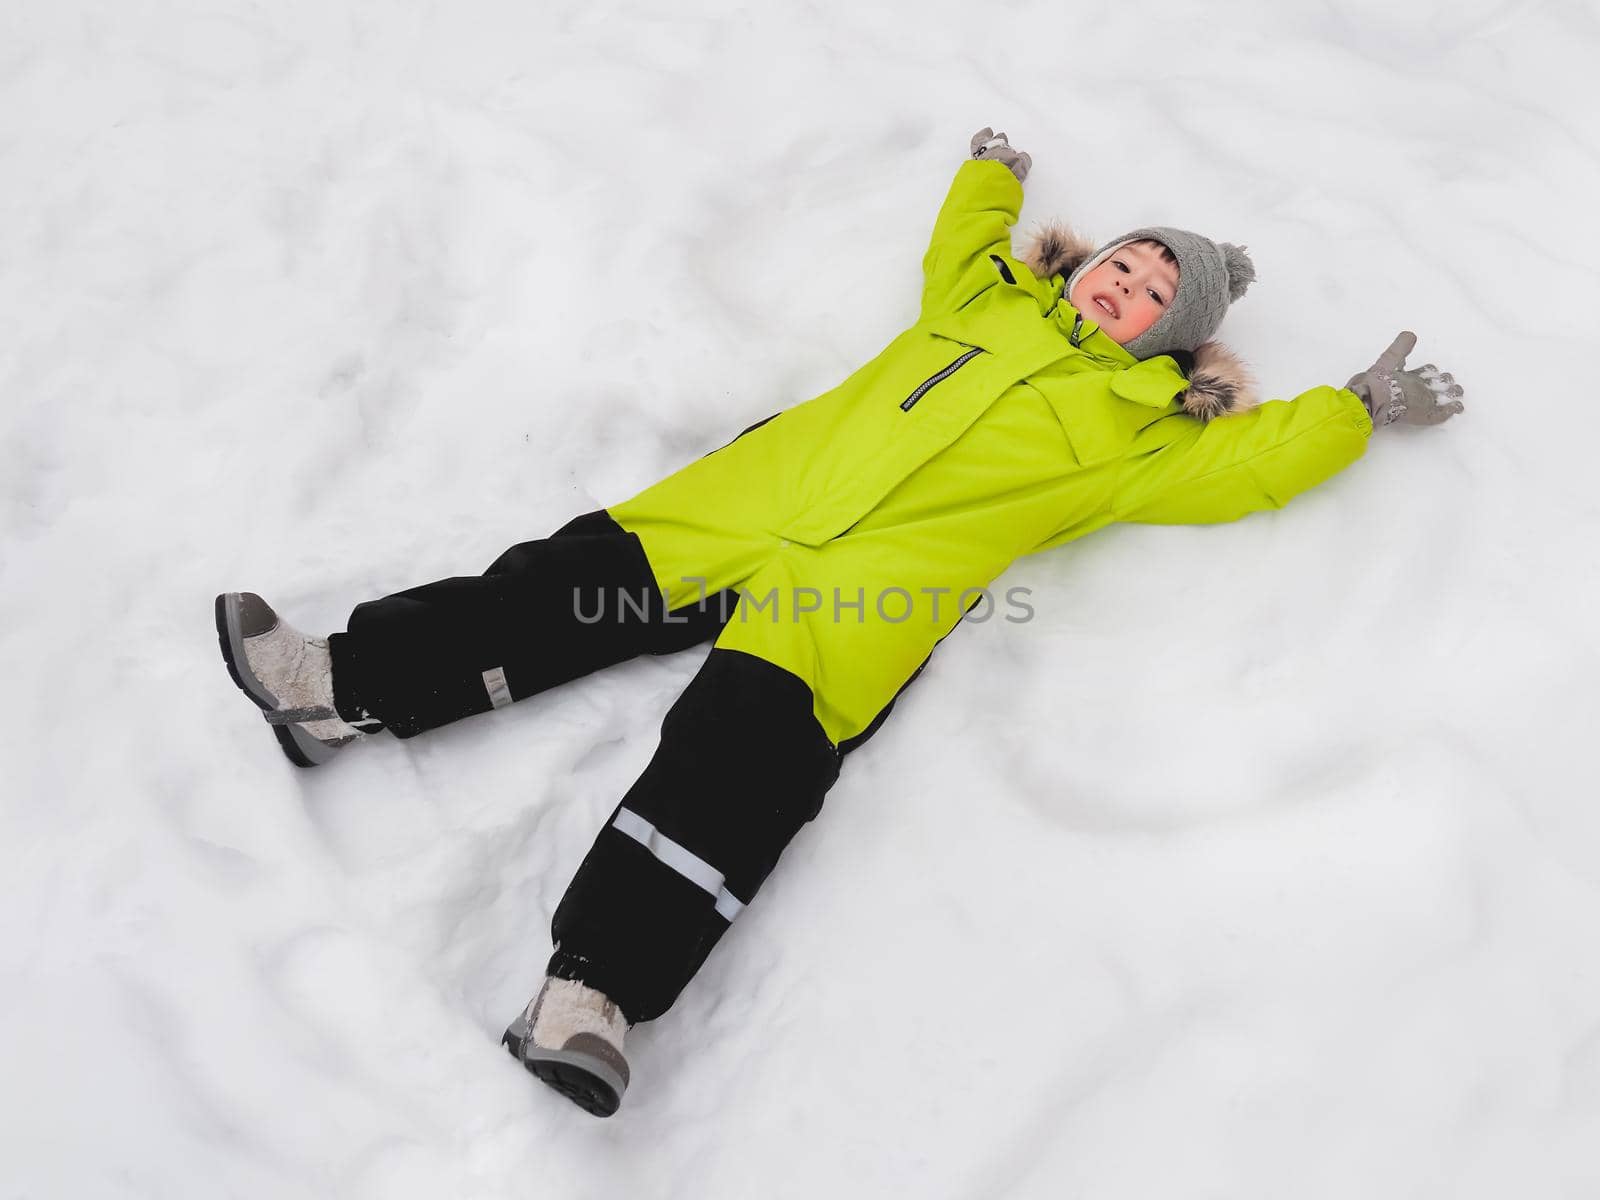 Smiling boy in green jumpsuit is making snow angel shape on snow. Joyful child playing outdoors in snowy weather. Top view on happy kid in colorful overall suit.